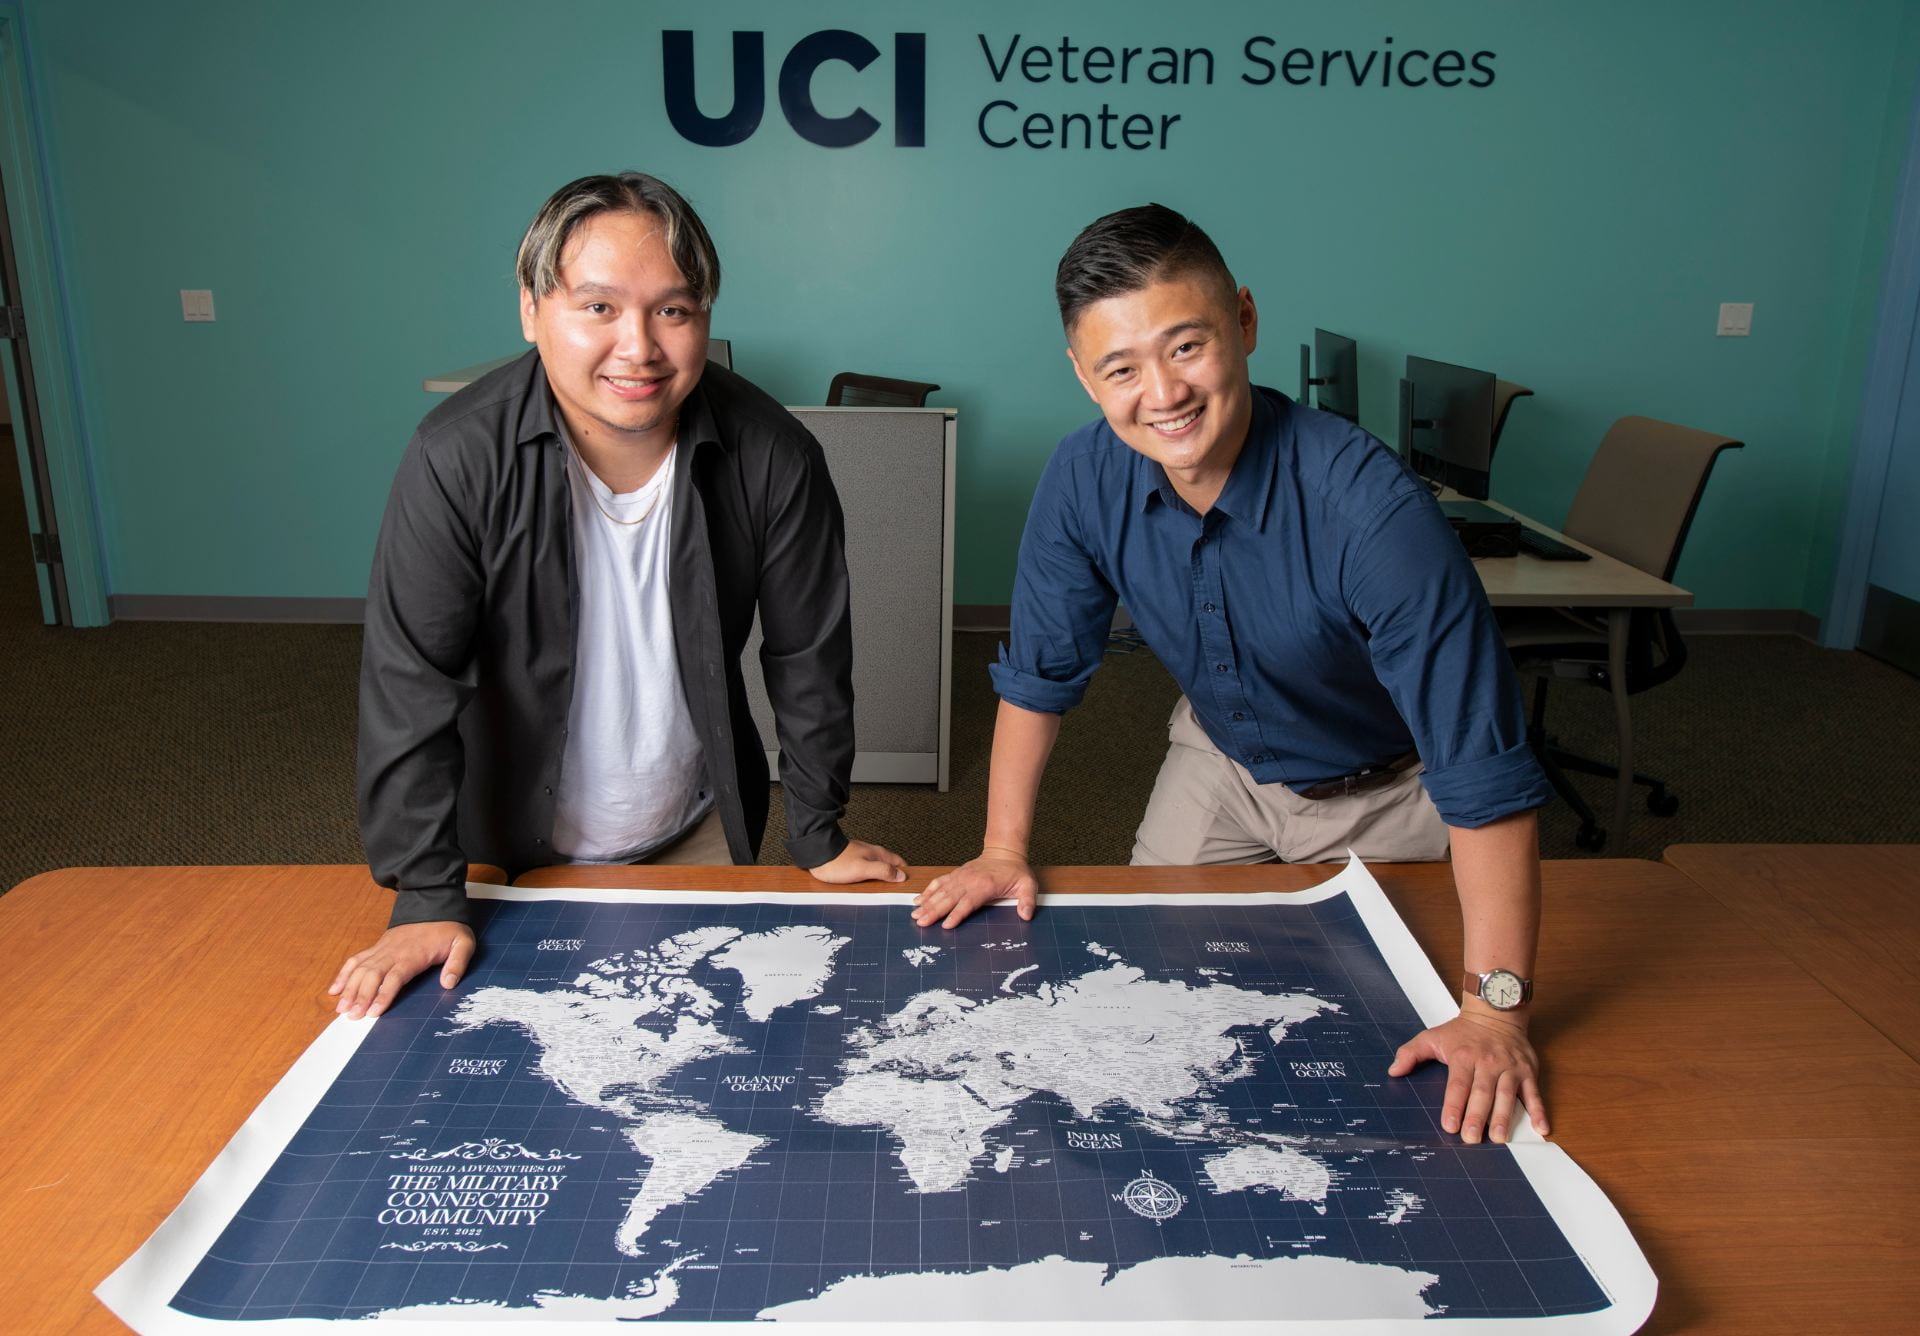 Emmanuel “David” Sangalang Delacruz (left) and Raymond Lim, a grad student in accounting and secretary of the MCC’s board, display the world map on which visitors to the campus’s Veteran Services Center are invited to pinpoint where they grew up and where they’ve been around the globe.